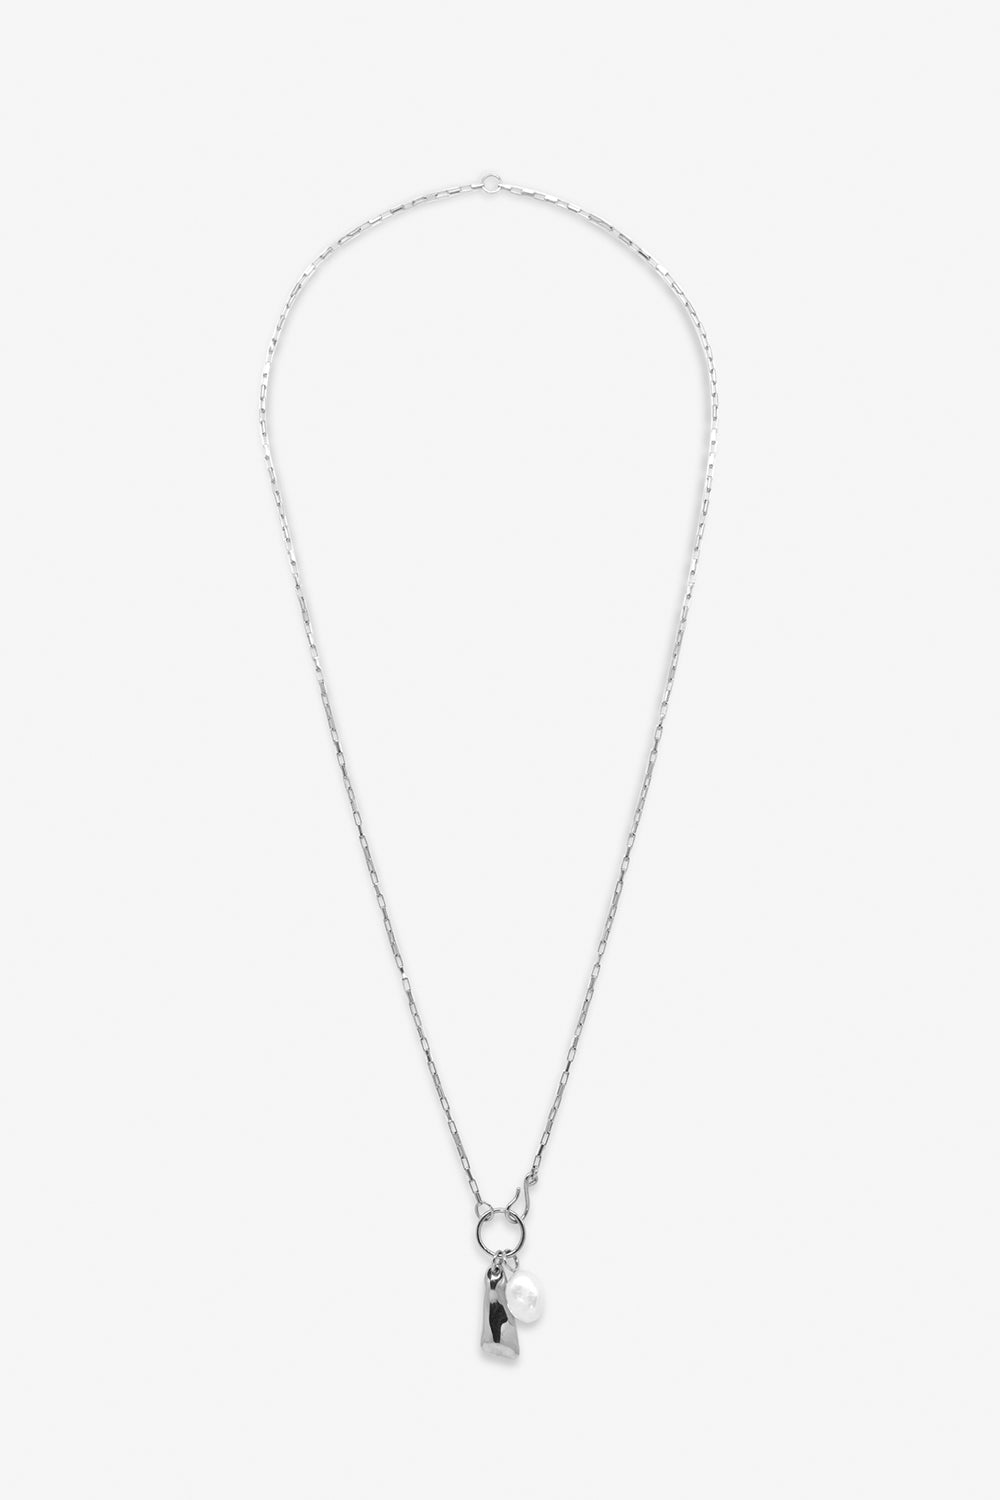 Tag Necklace - Sterling Silver